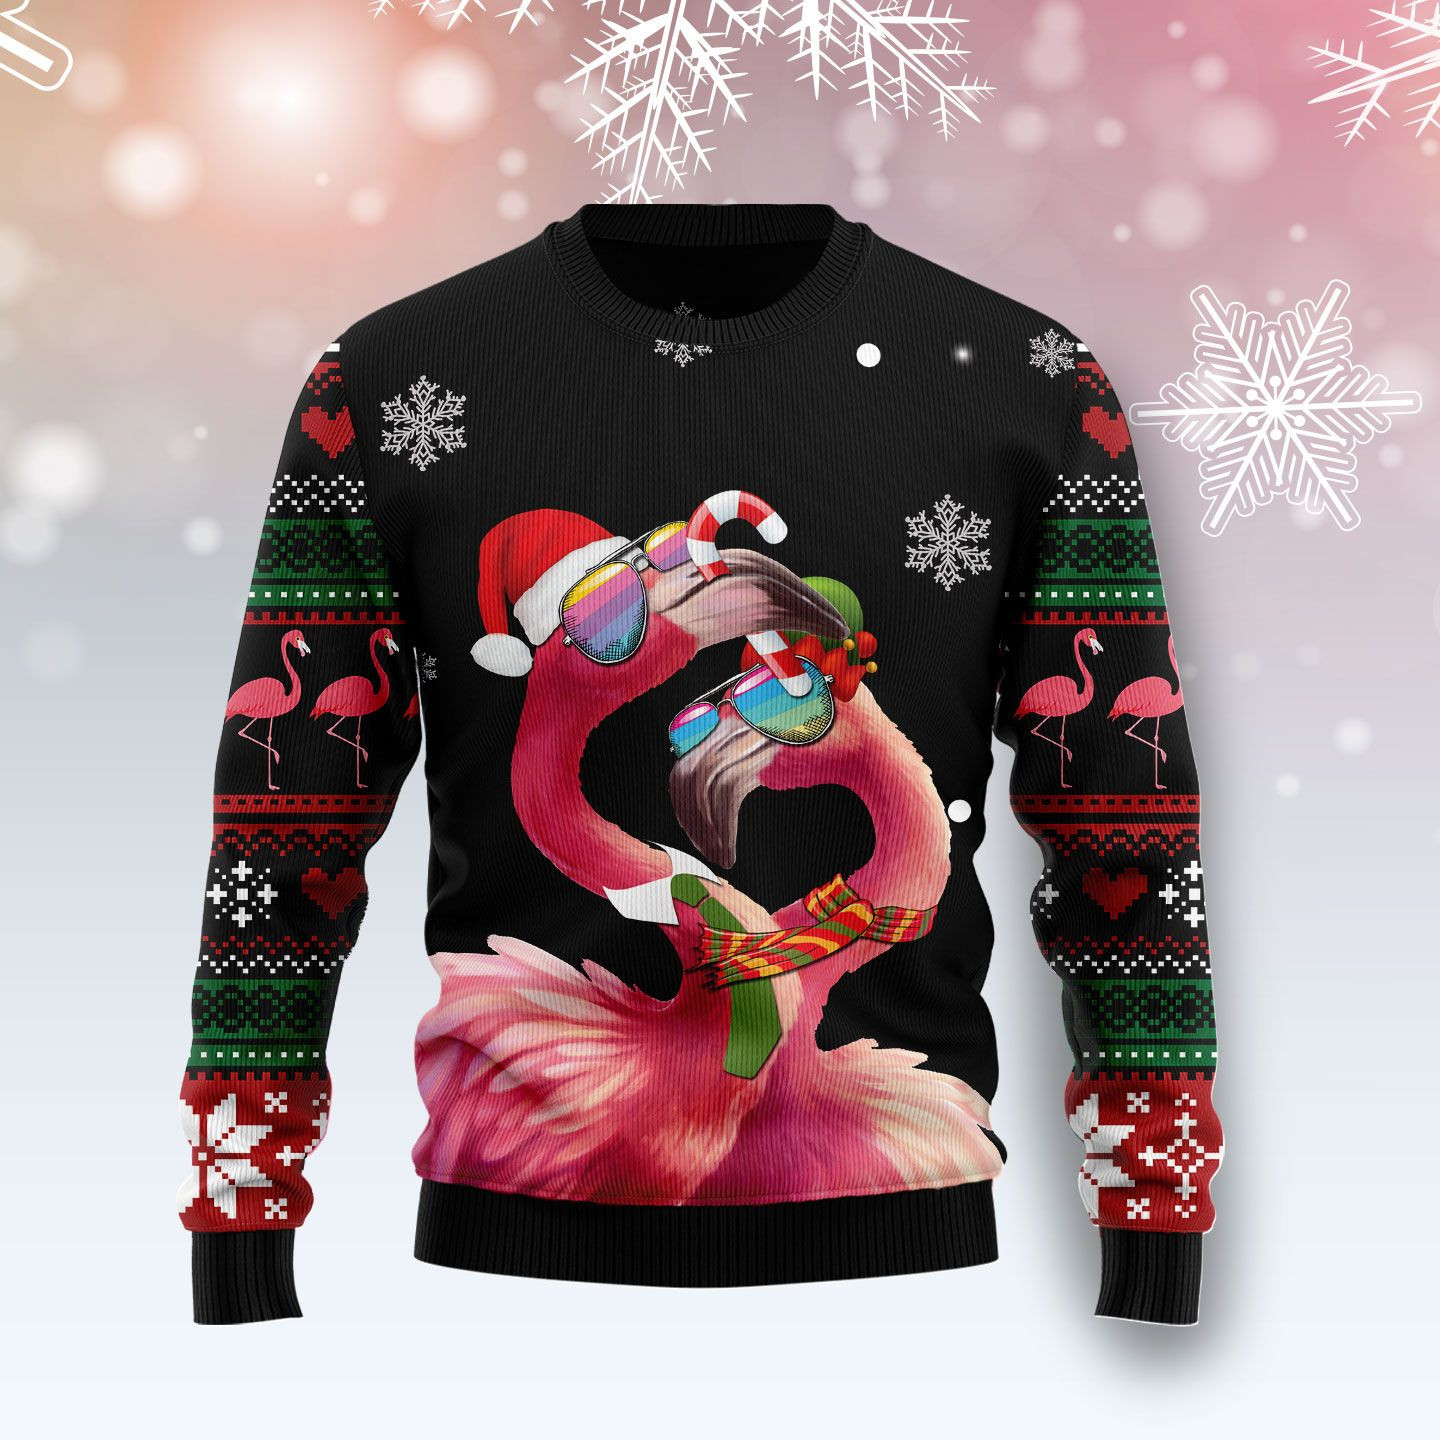 Flamingo Couple Ugly Christmas Sweater Ugly Sweater For Men Women, Holiday Sweater